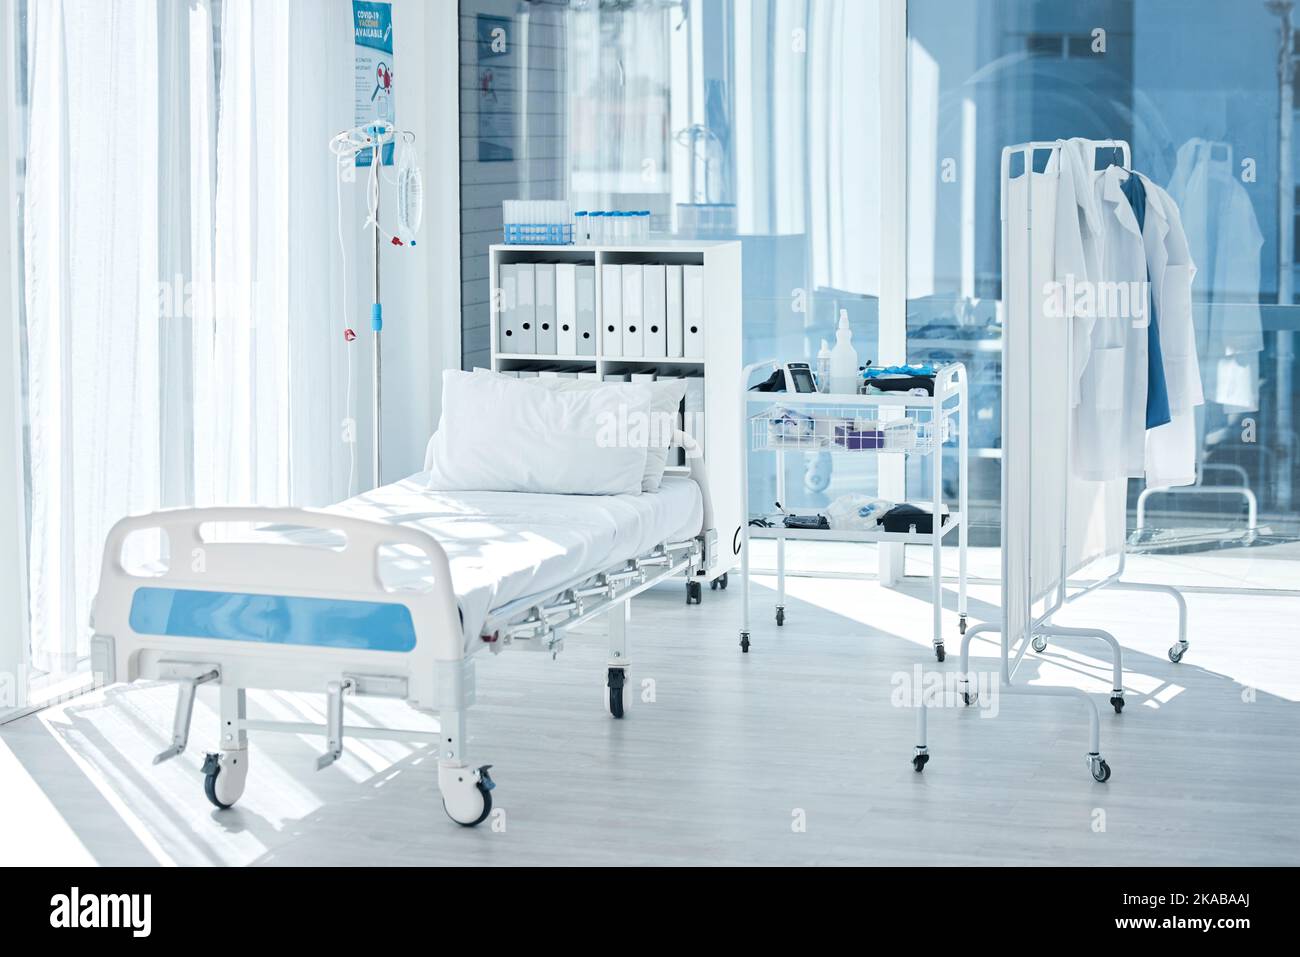 Backgrounds of empty patient room, bed and private healthcare facility, hospital and medical center of consulting, healing and rehabilitation Stock Photo